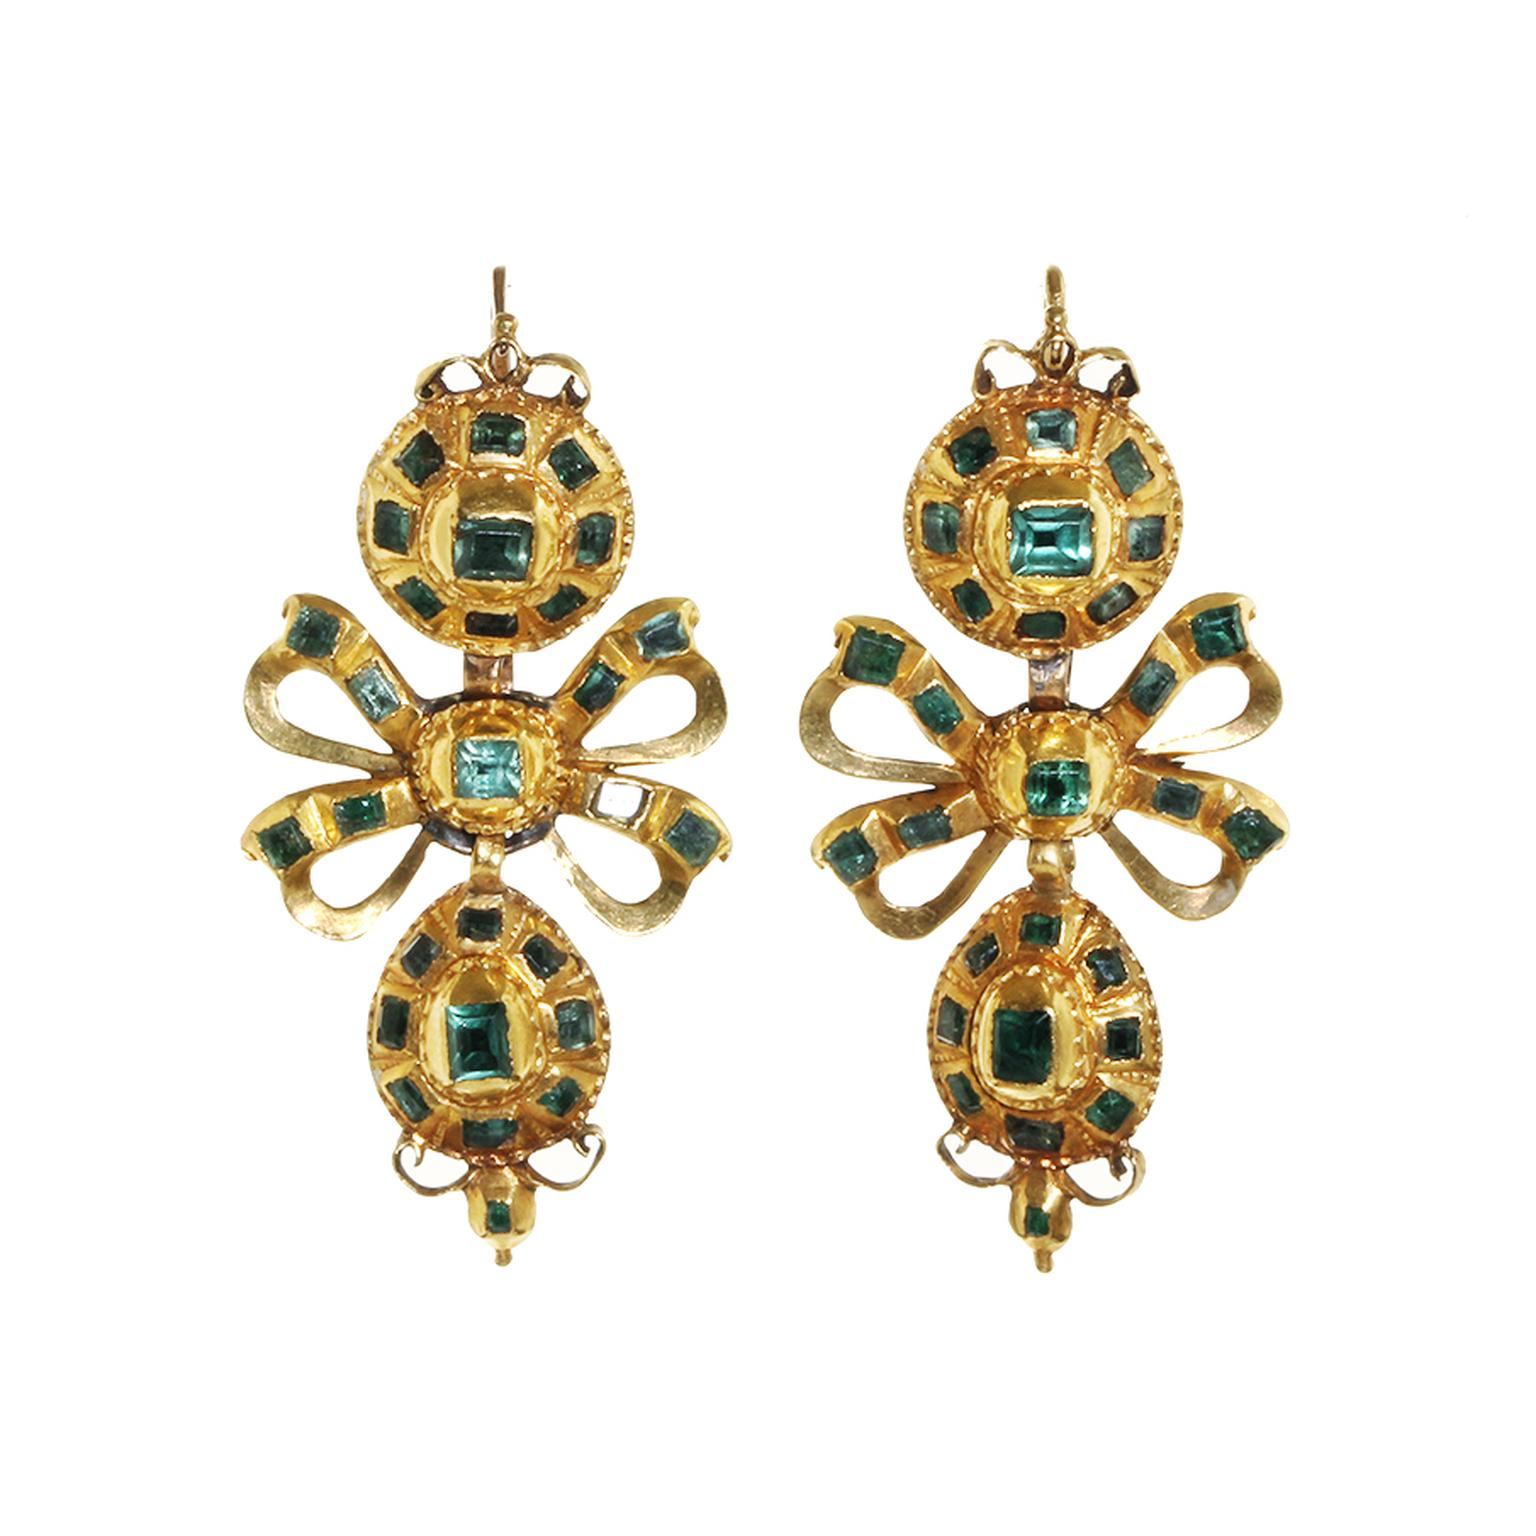 Bell and Bird antique Iberian emerald and gold earrings